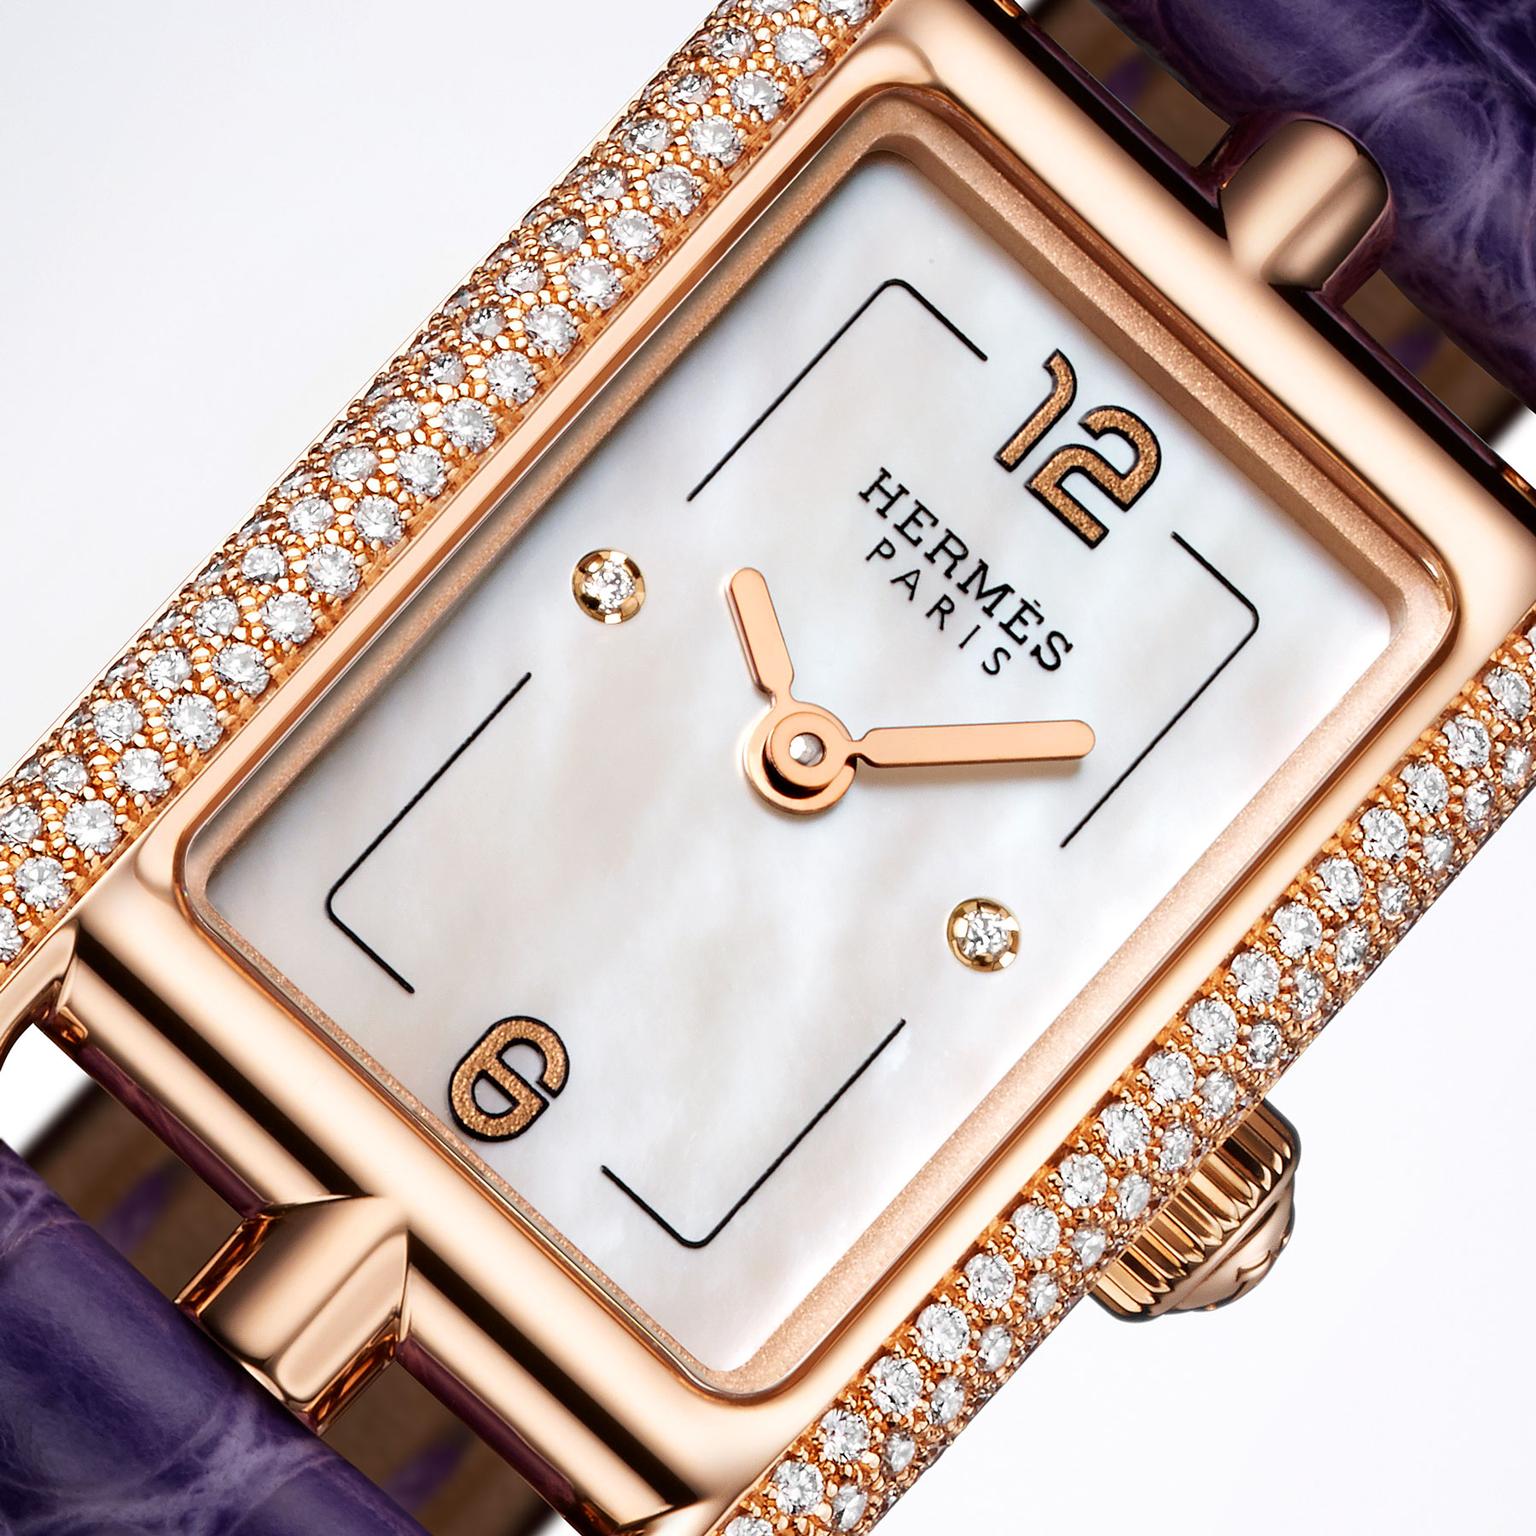 Hermes Nantucket watch in rose gold with diamonds